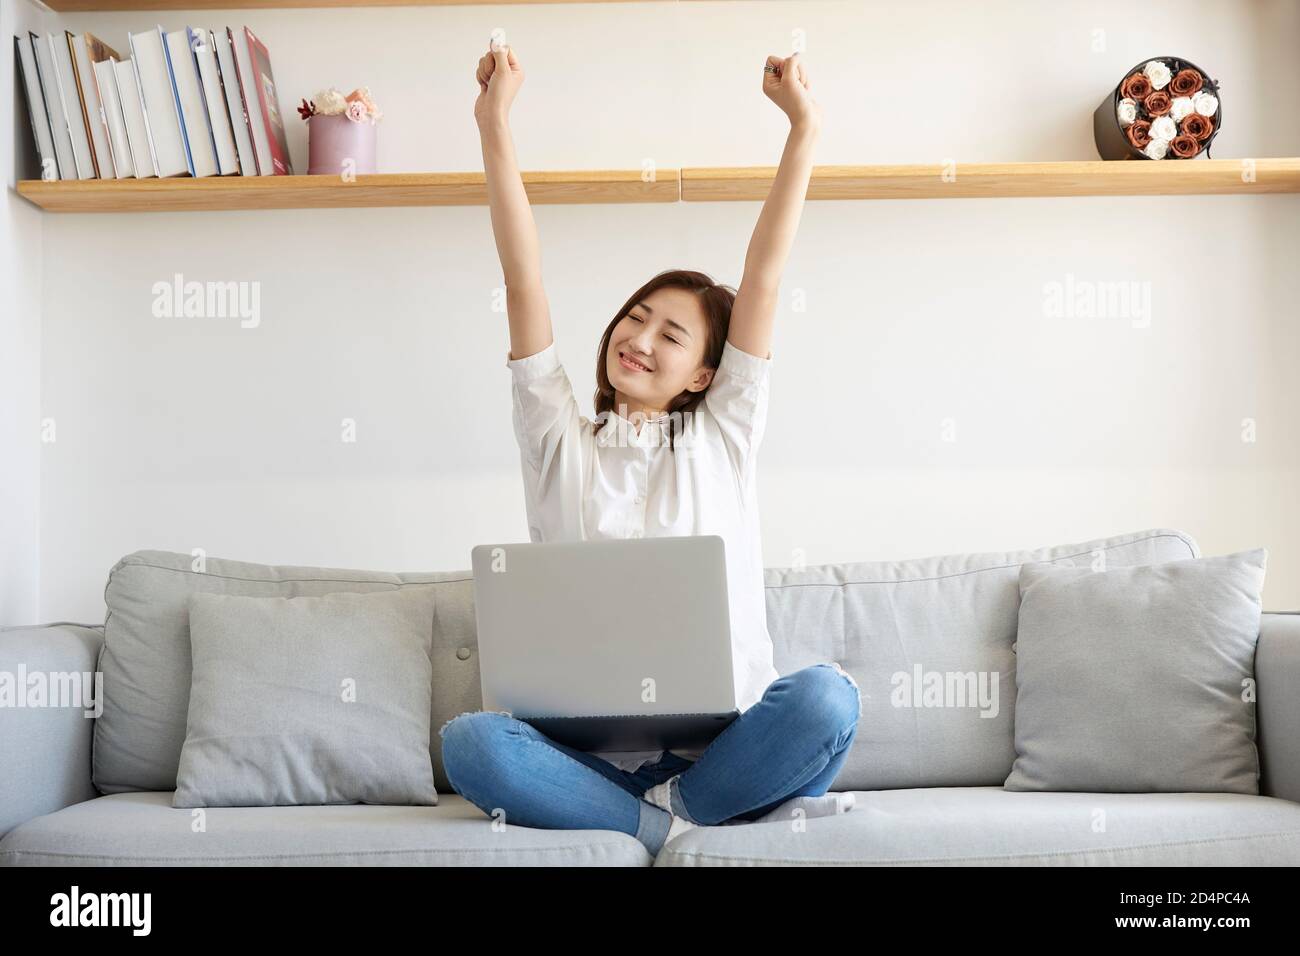 young asian business woman working from home sitting on couch stretching arms happy and smiling Stock Photo